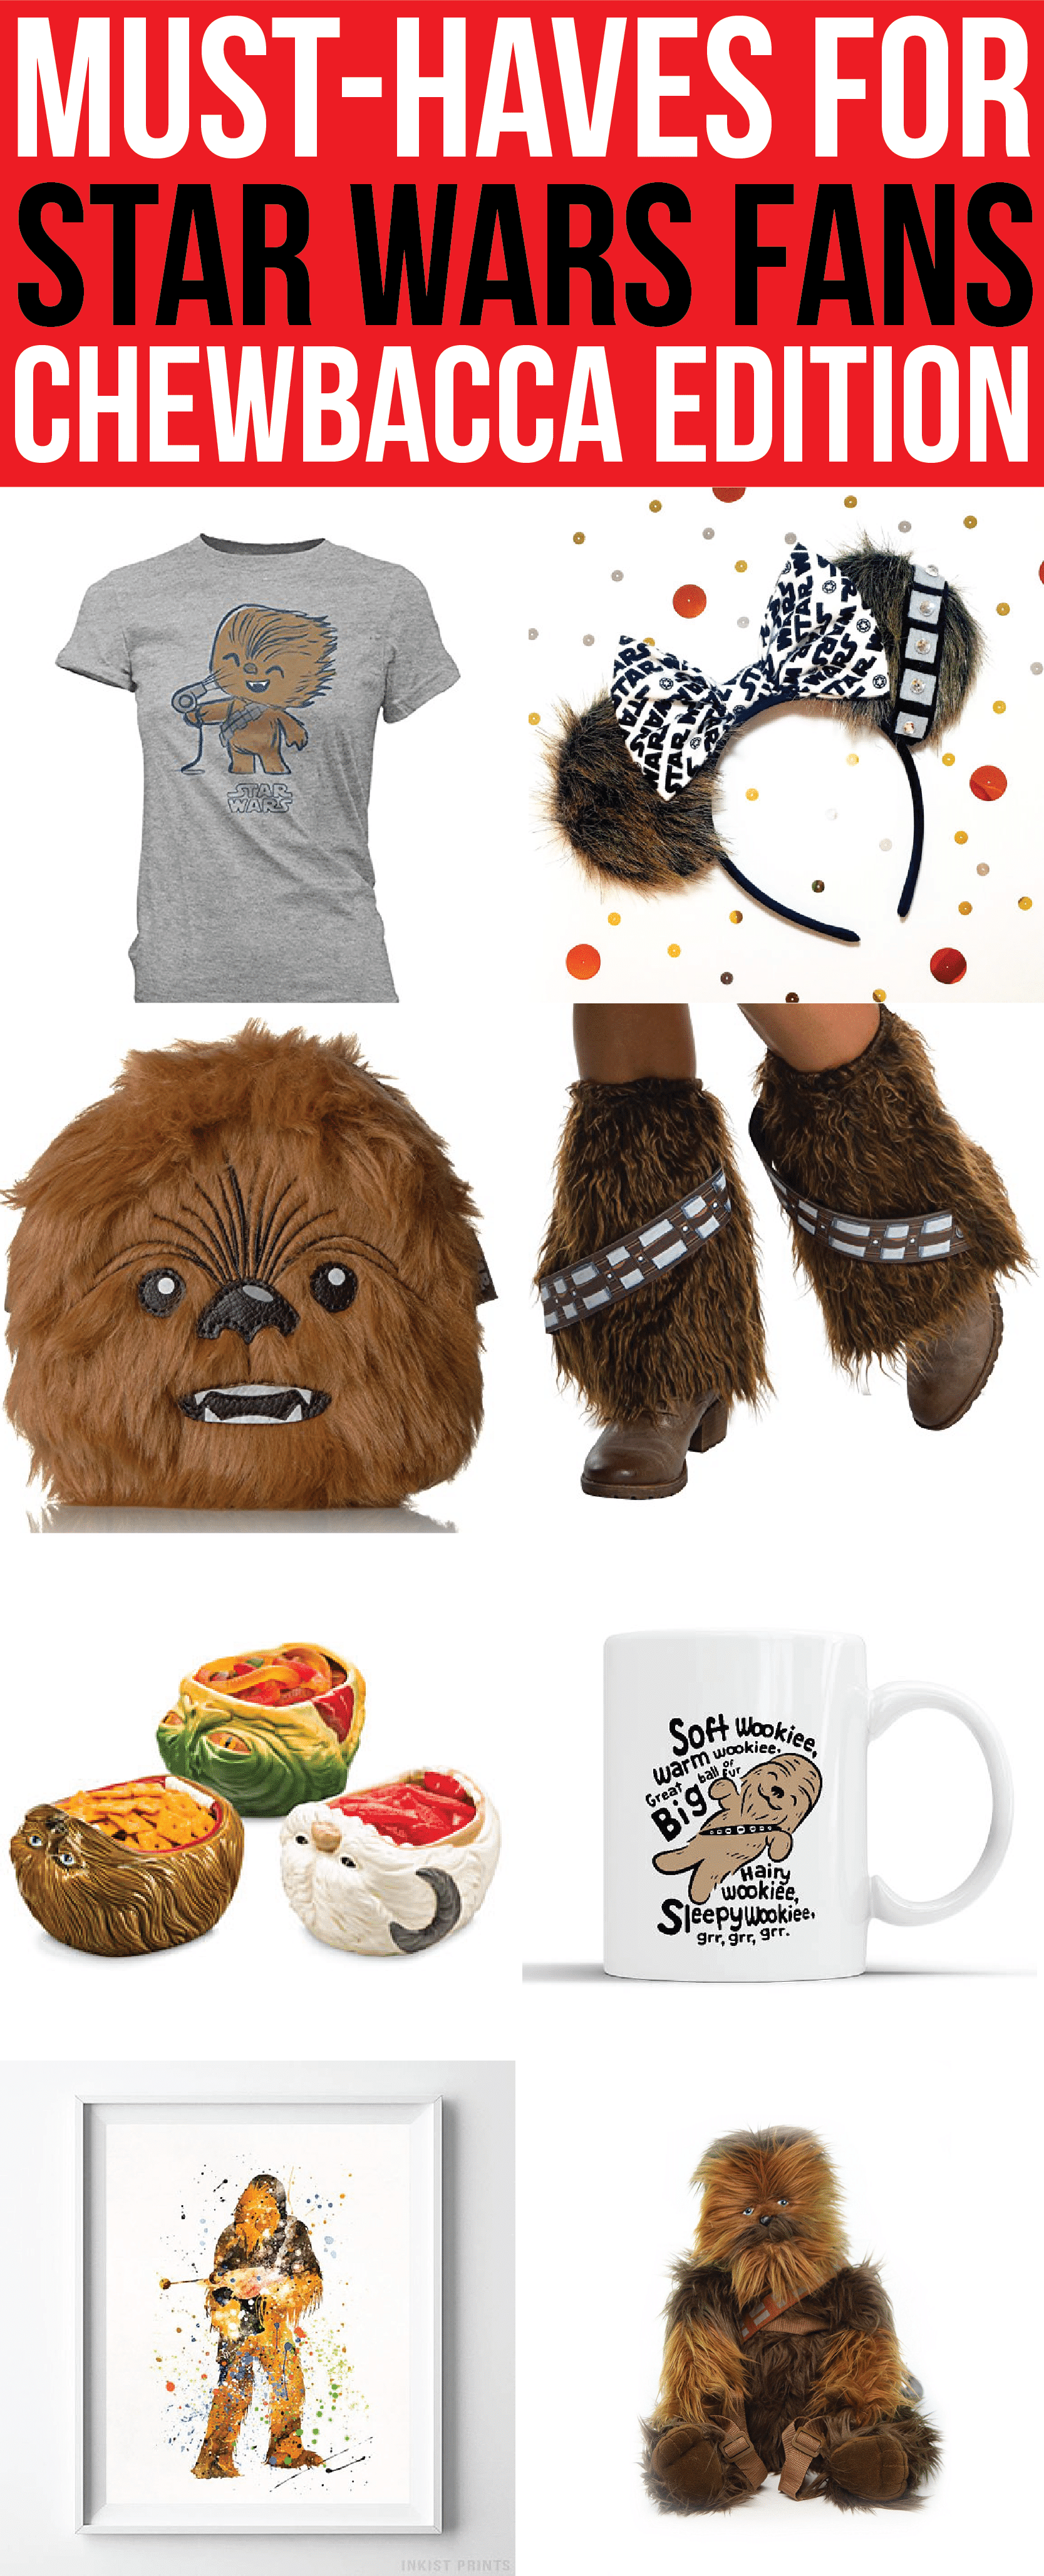 Need Star Wars gift to bring to a party? These Chewbacca inspired products are some of the best birthday gifts, Star Wars clothes, or really just products for people who loved The Last Jedi